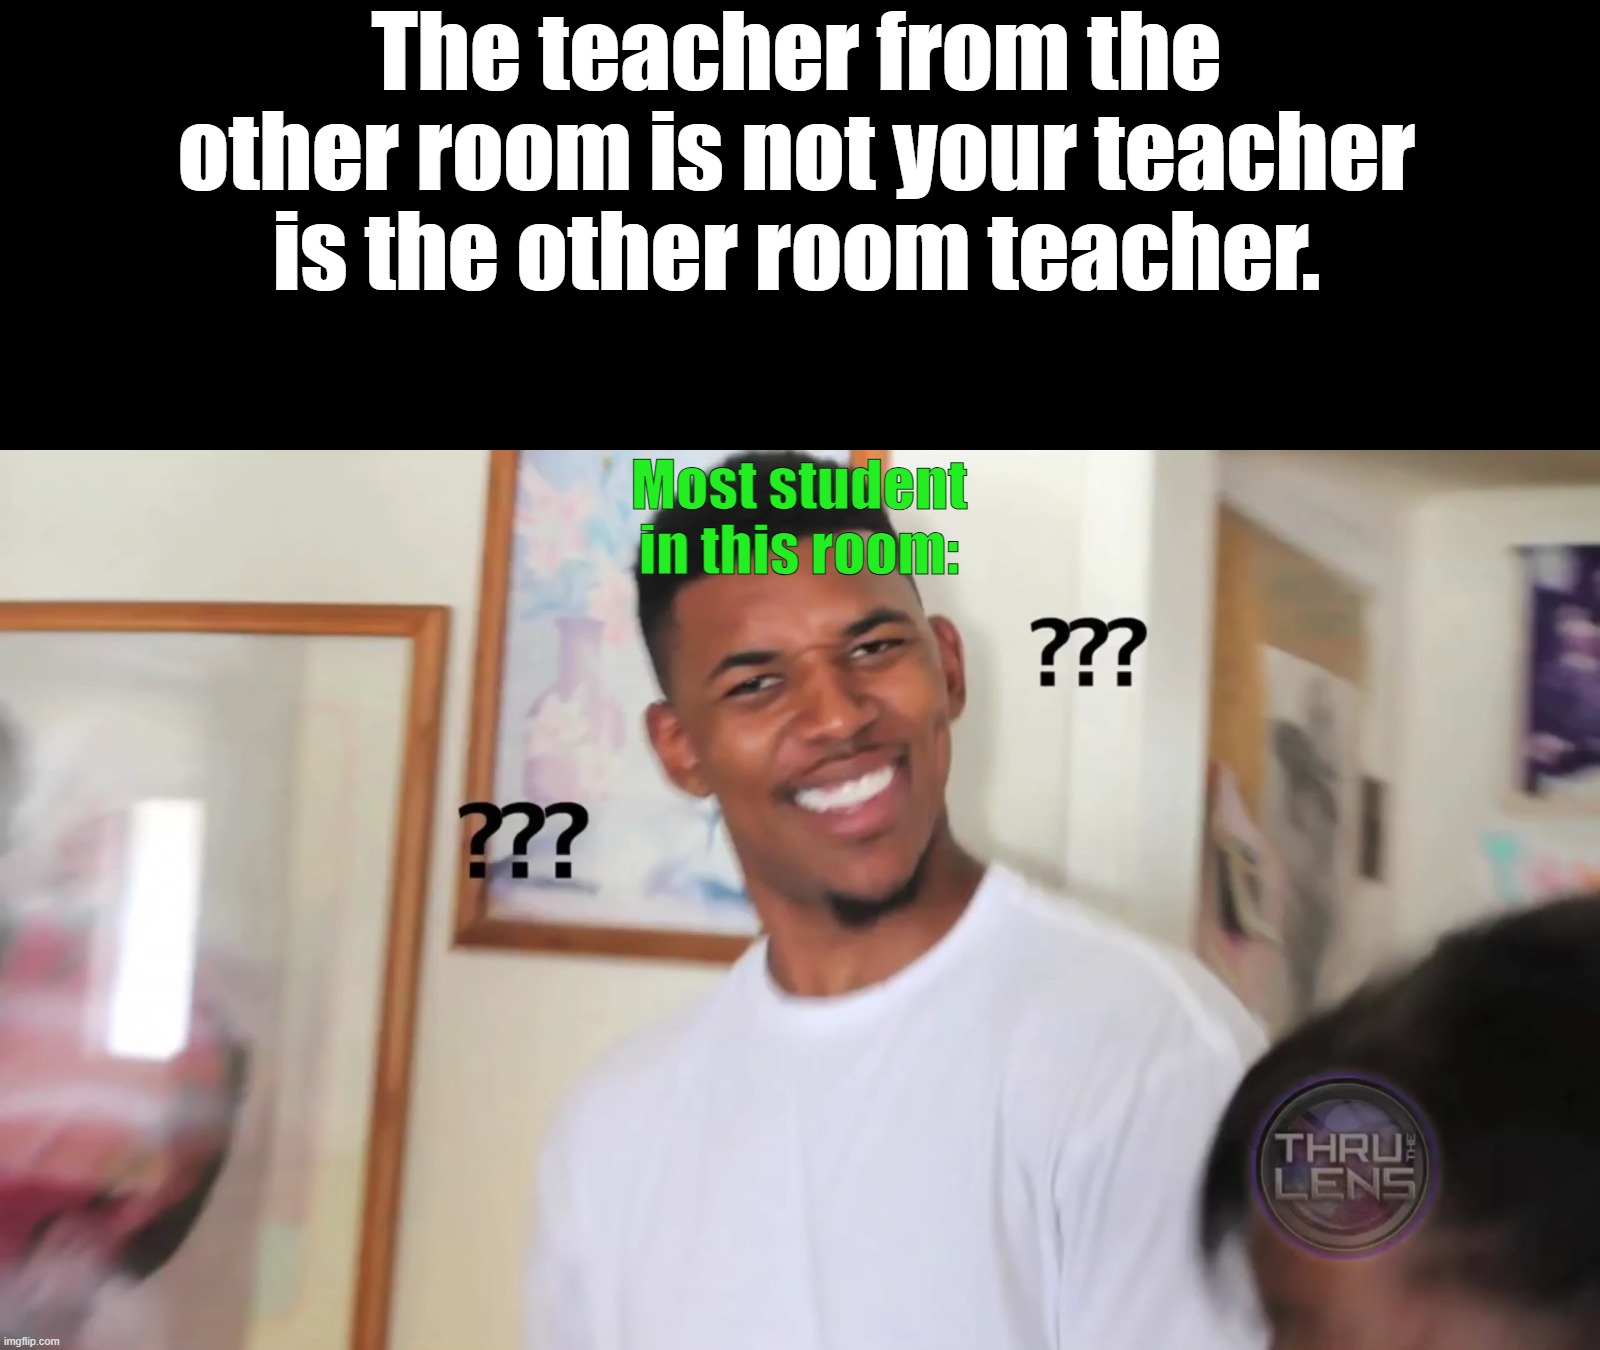 Eastglen CLS | The teacher from the other room is not your teacher is the other room teacher. Most student in this room: | image tagged in black guy question mark,school,funny,memes | made w/ Imgflip meme maker